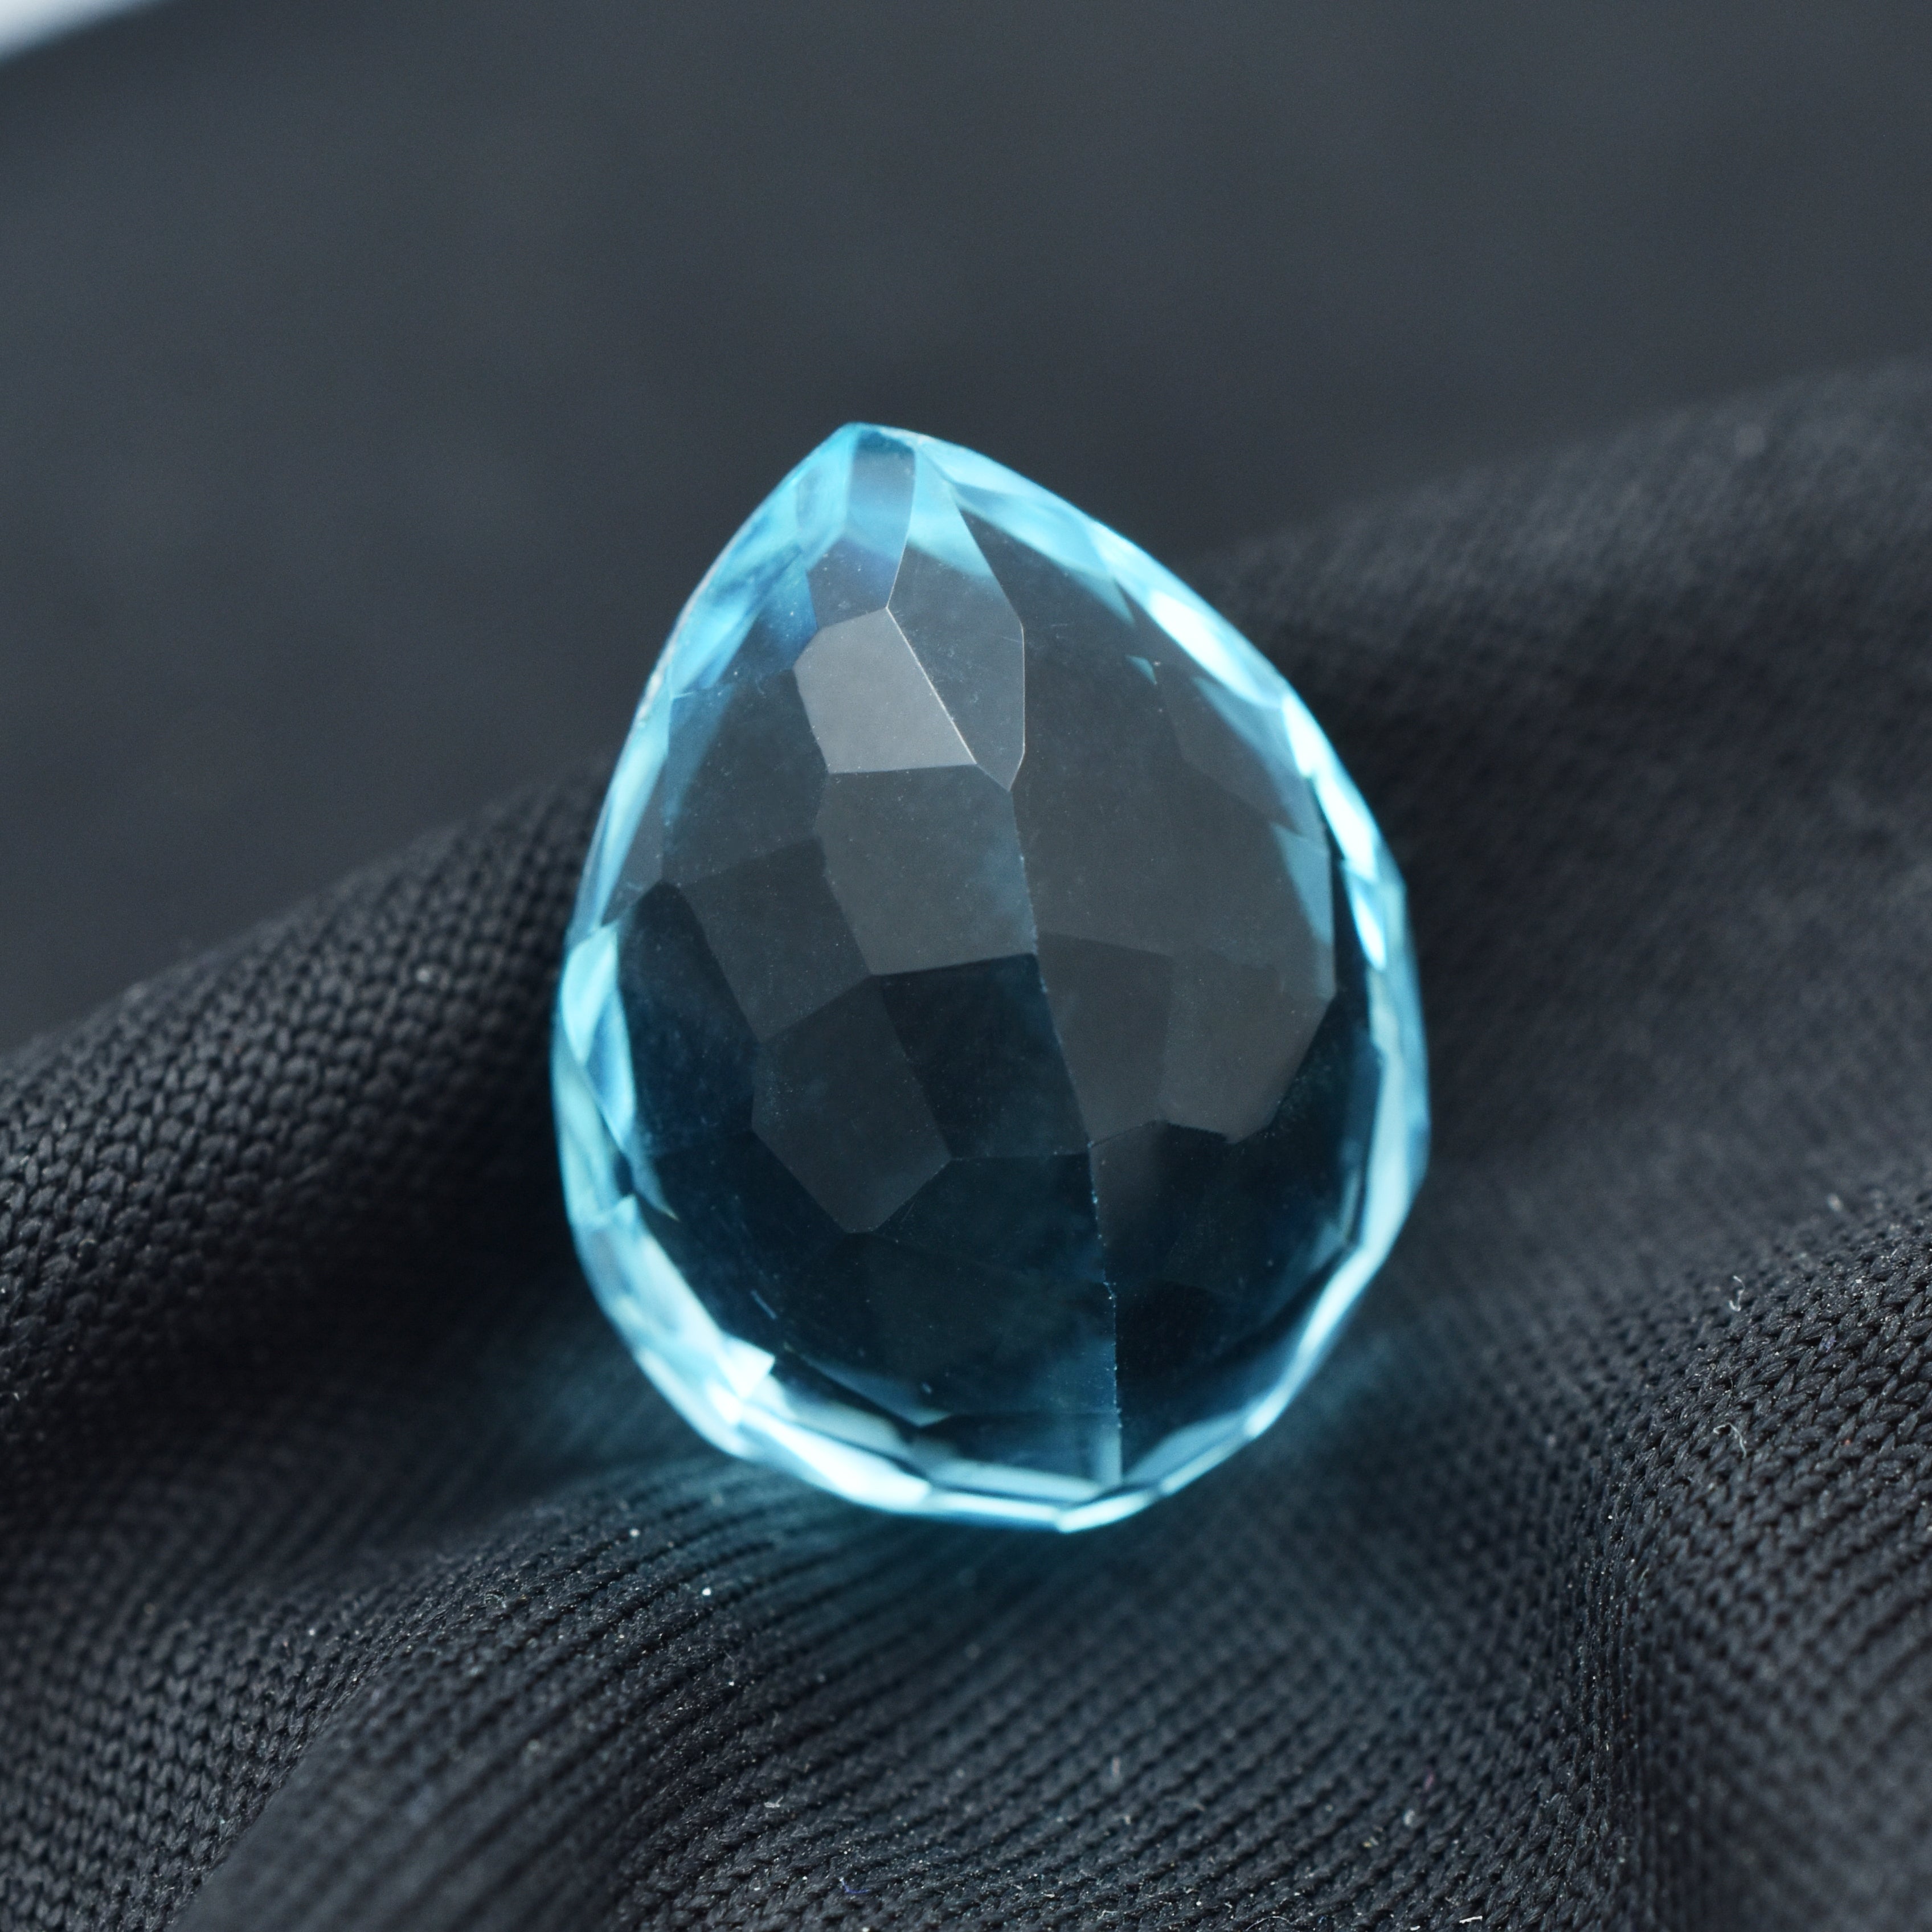 Winter Sale With Best Aqua Gem !!! Certified Natural 14.22 Ct Pear Cut Pendant Making Aquamarine Gem Loose Gemstone | Free Delivery With Excellent Gift